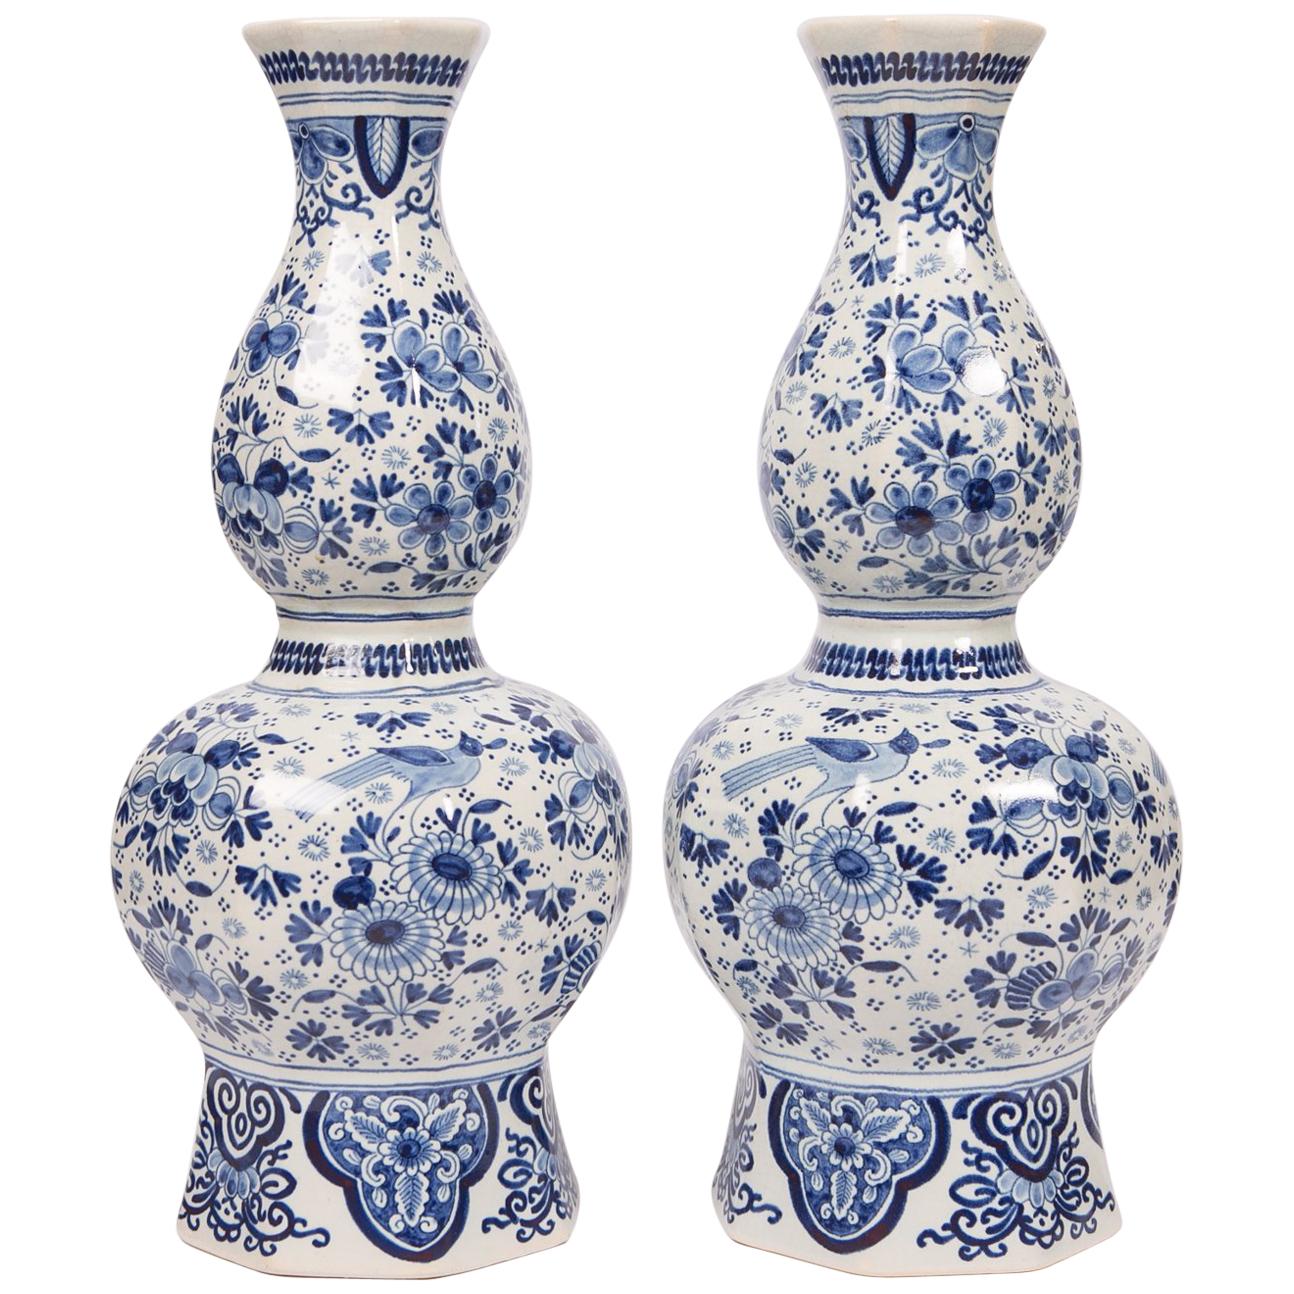 Pair of Tall Blue and White Delft Vases